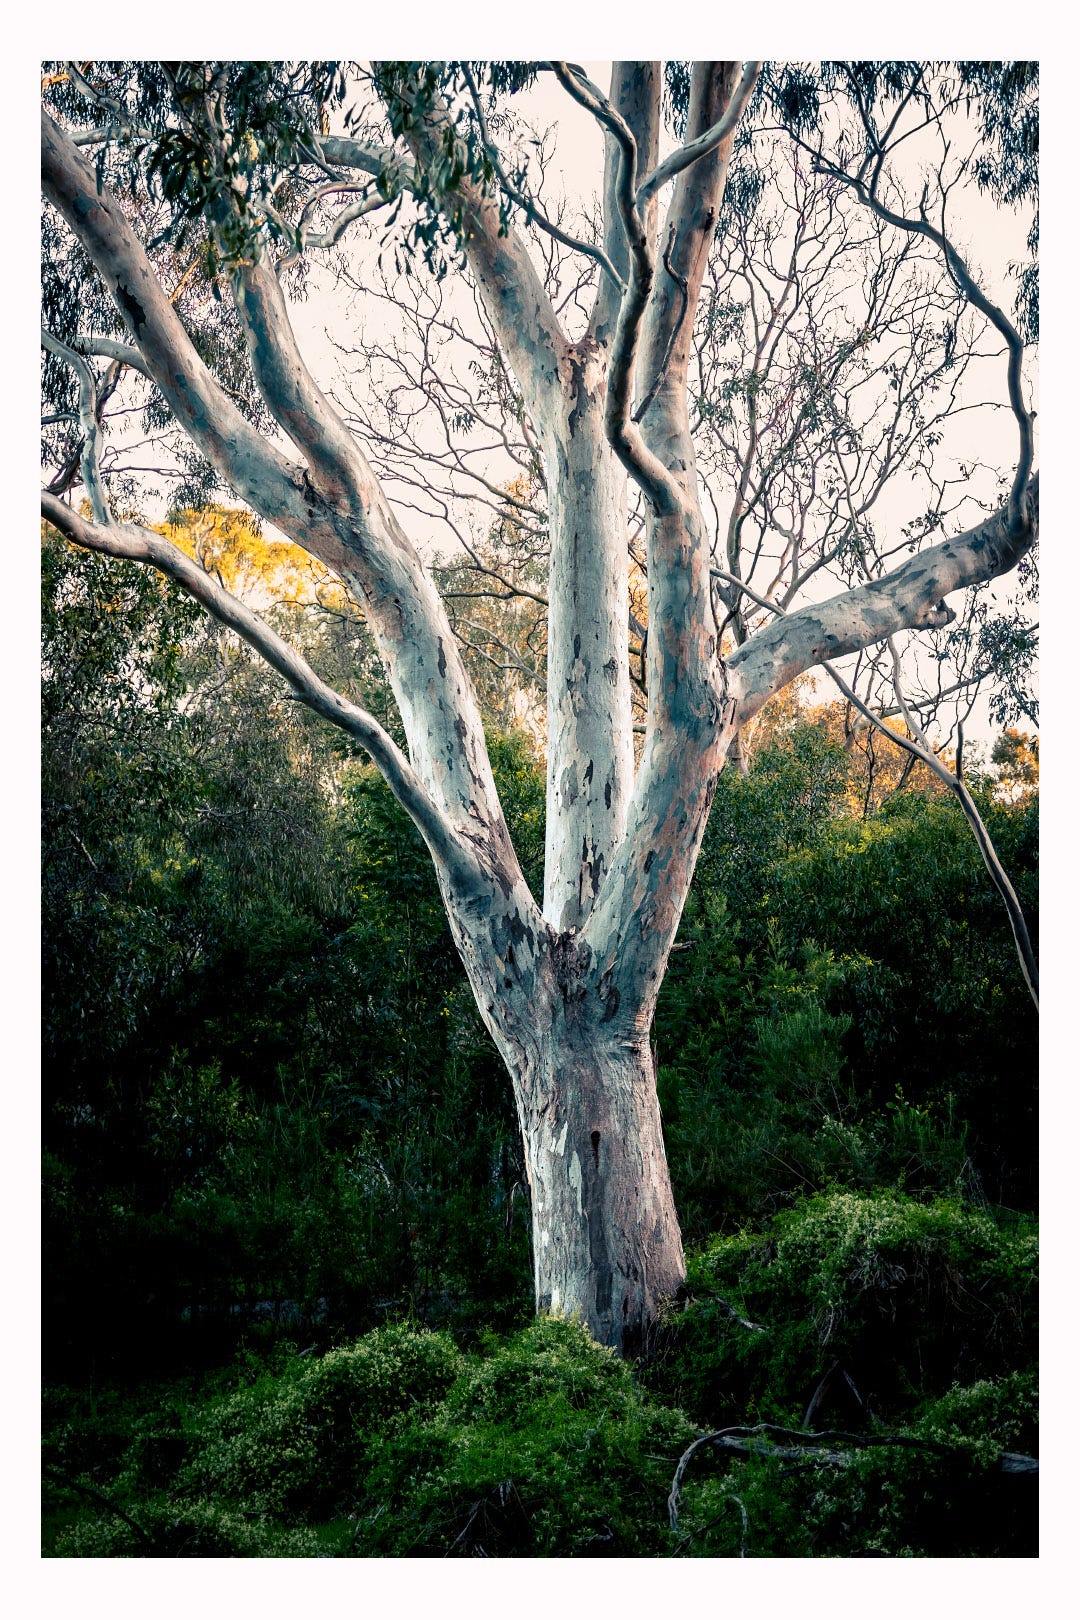 A eucalyptus tree with beautiful coloured bark surrounded by green scrubs in early morning light